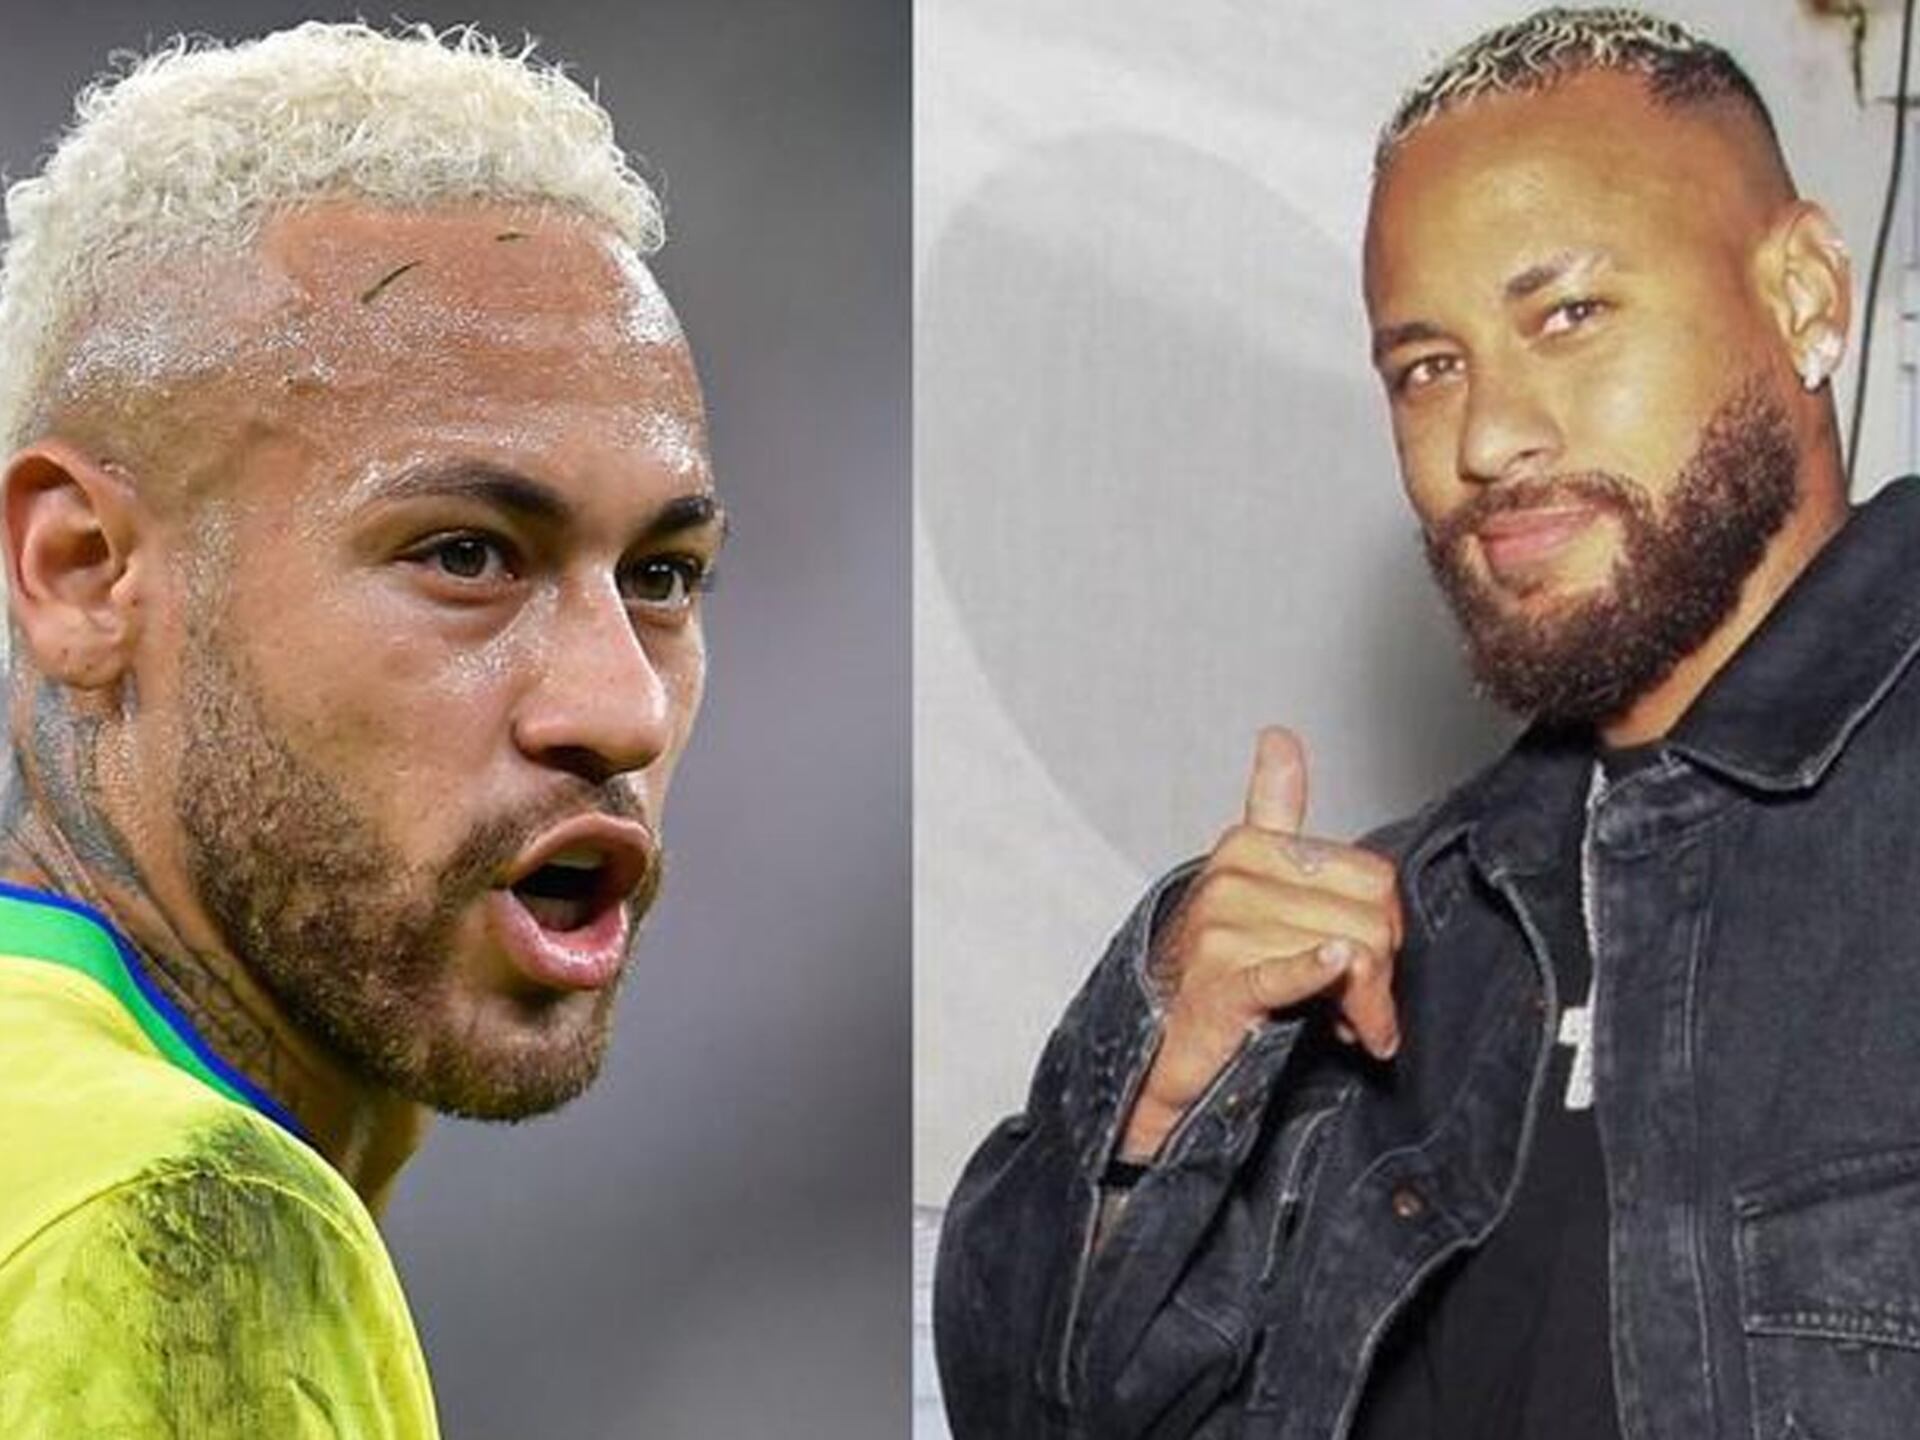  The scandals don't stop, Neymar is in the news again with another controversy